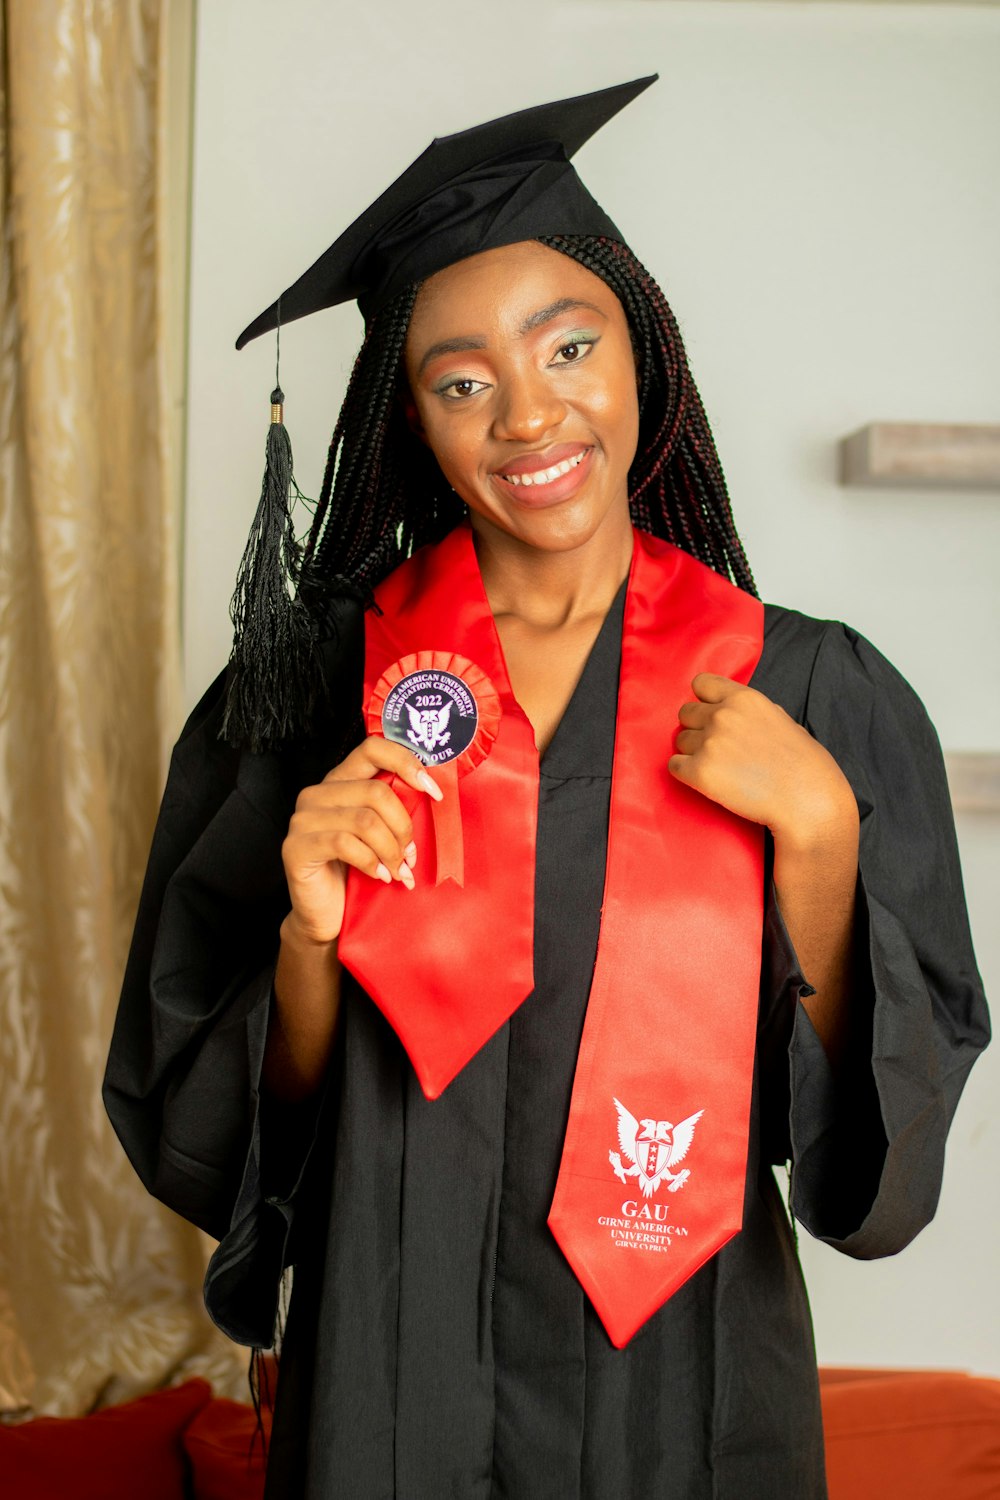 a woman in a graduation gown holding a red tie